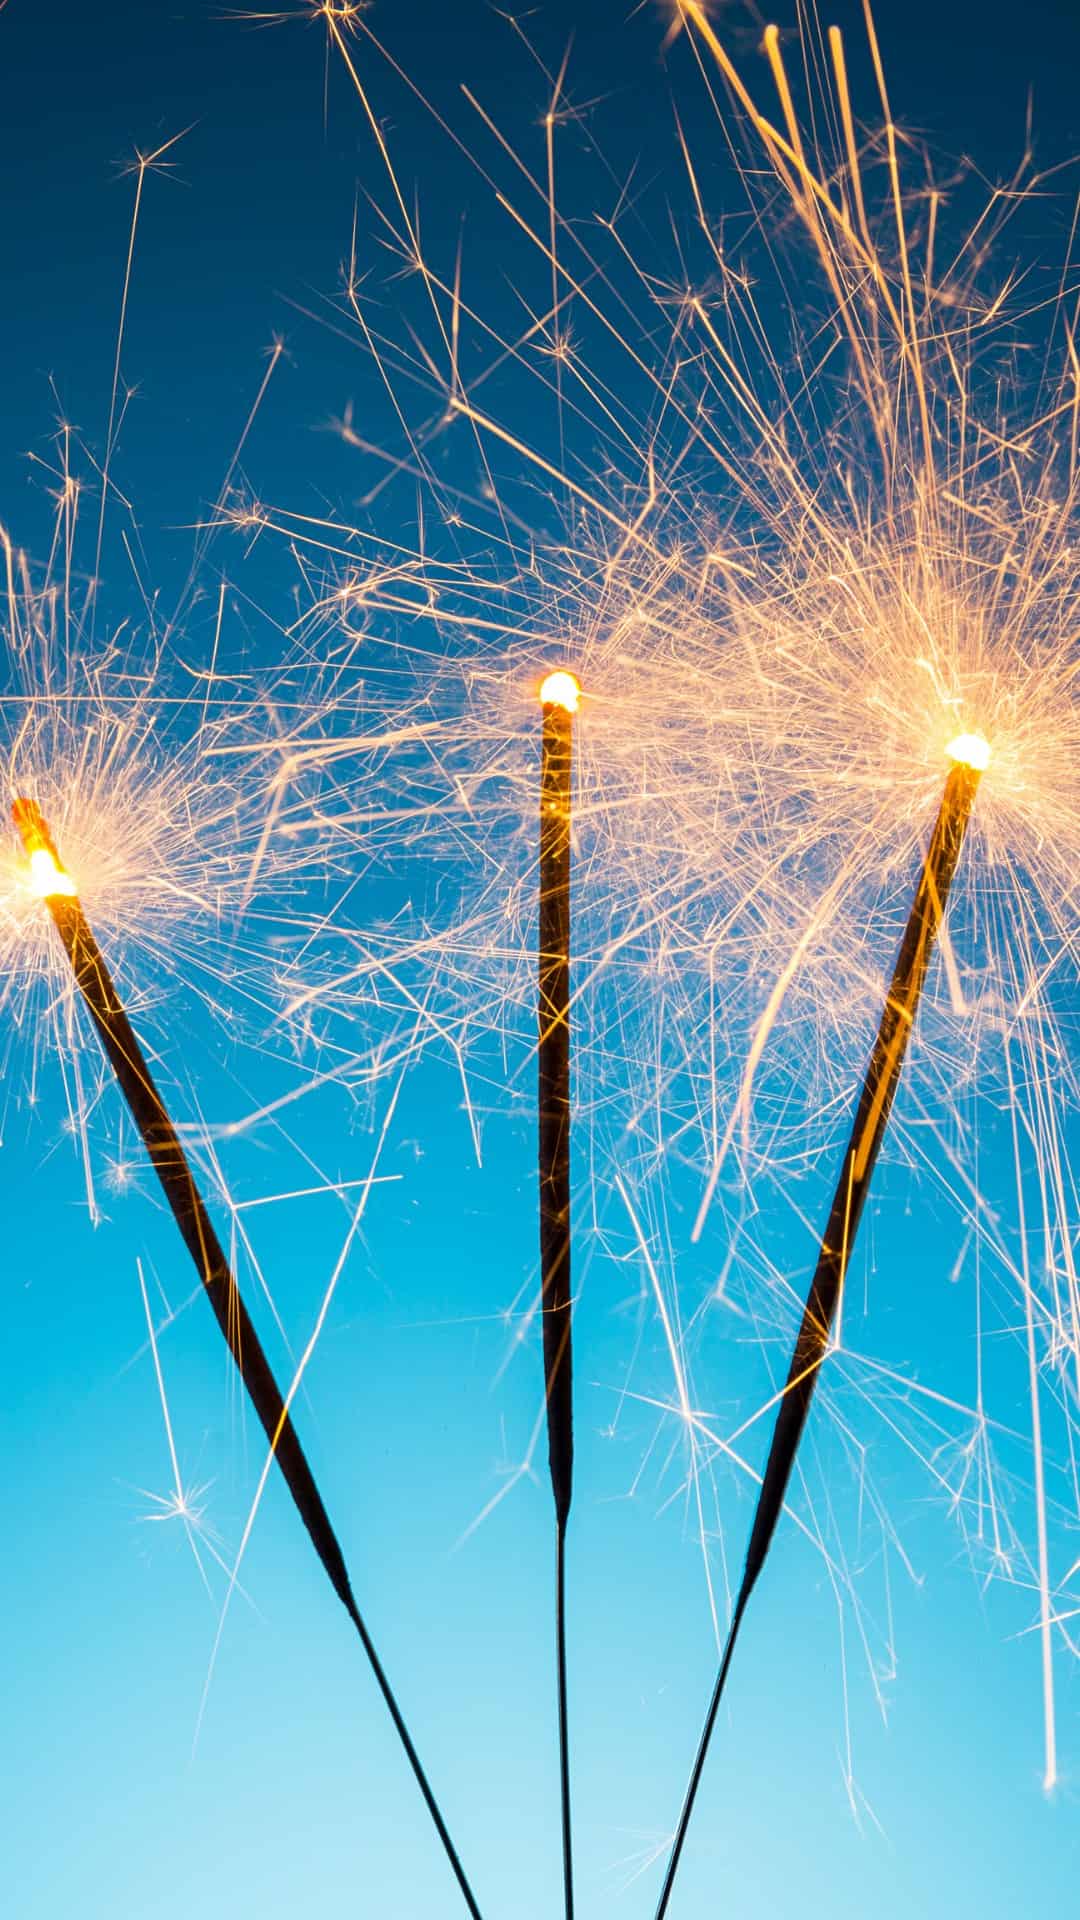 A group of sparklers in the air - New Year, happy